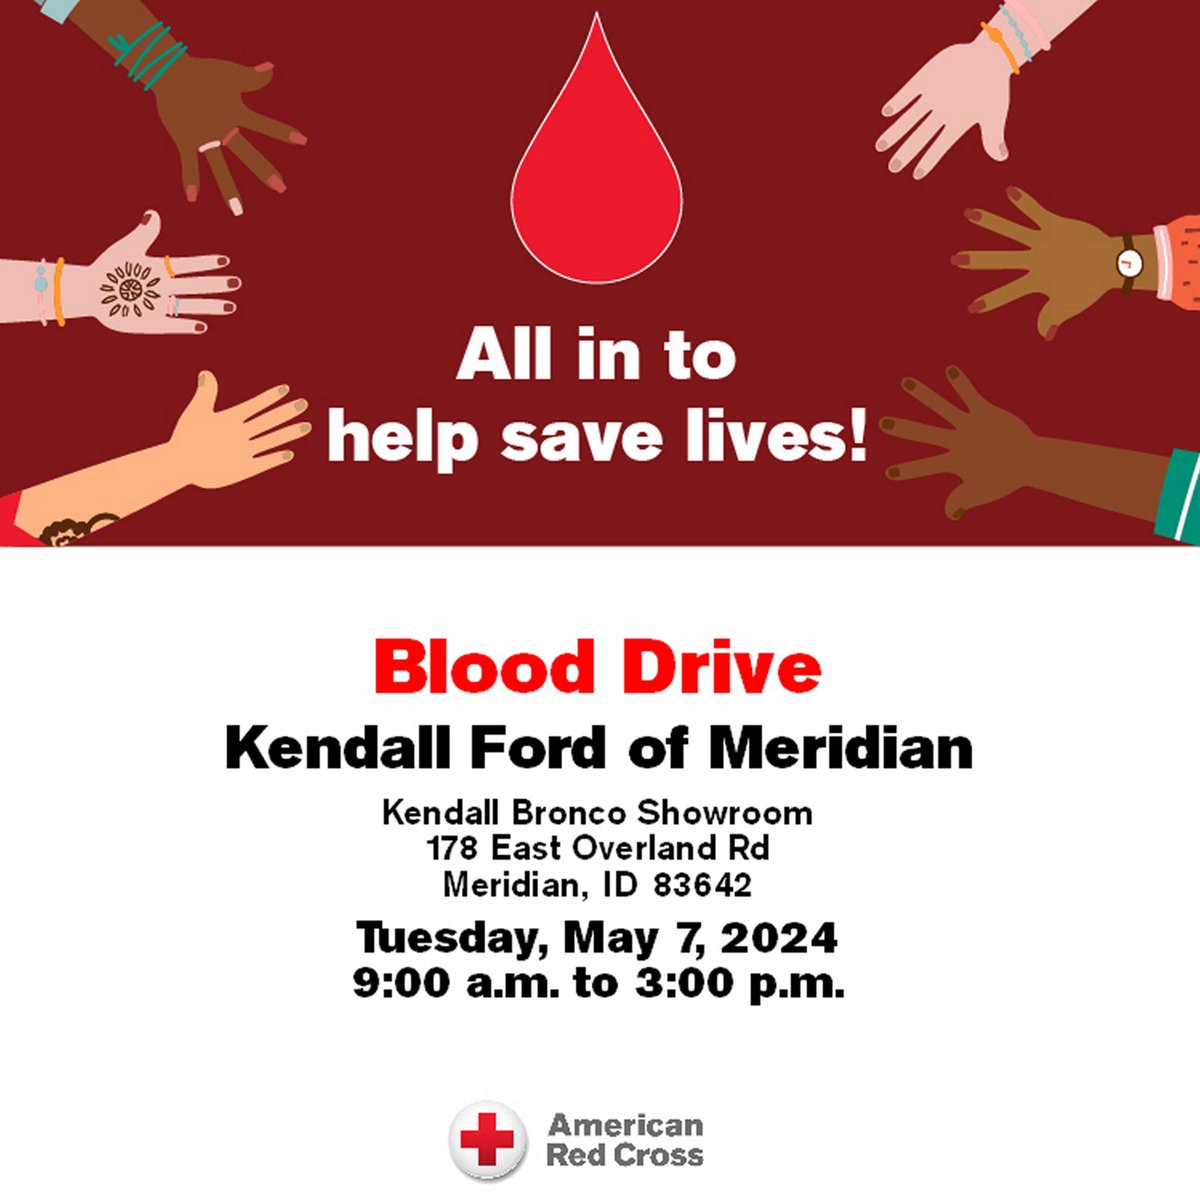 Mark your calendars! Join us at the Kendall Bronco Showroom on May 7th from 9am to 3pm for the American Red Cross Blood Drive. Your donation can save lives! #BloodDrive #americanredcross 
RESERVE A SPOT -> nuvi.me/srk95w